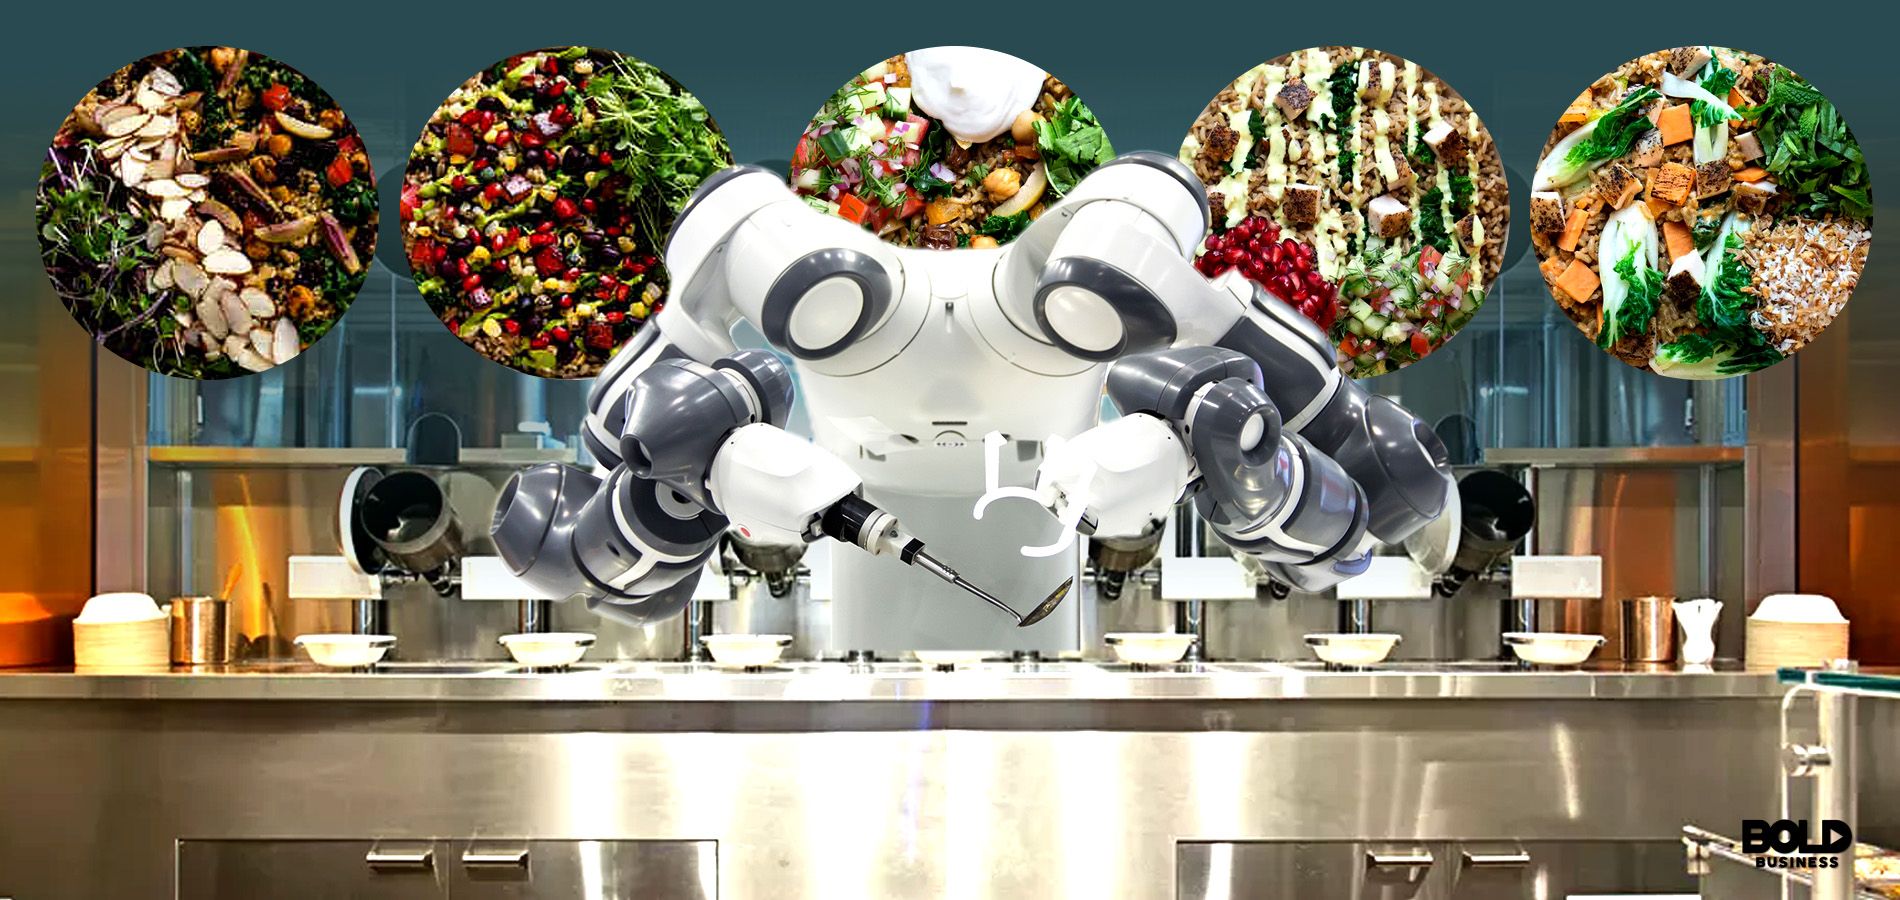 ACE, Automated Cooking Robot